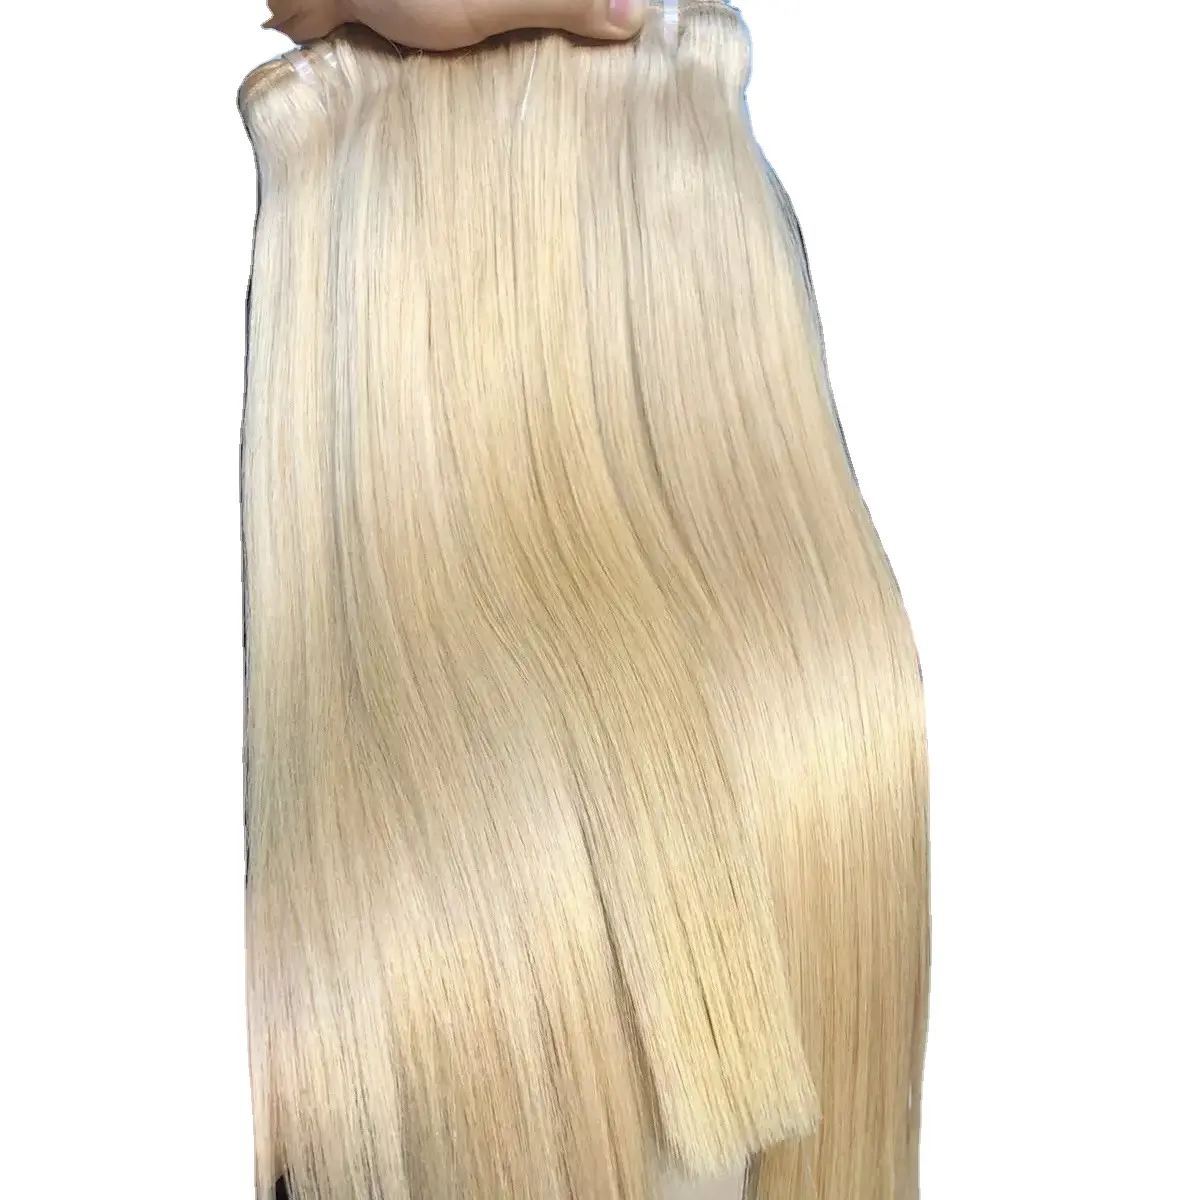 Best Quality Human Hair Extensions Non Chemical 613 Color, Virgin Hair Cuticle Aligned Bundles Competitive Price